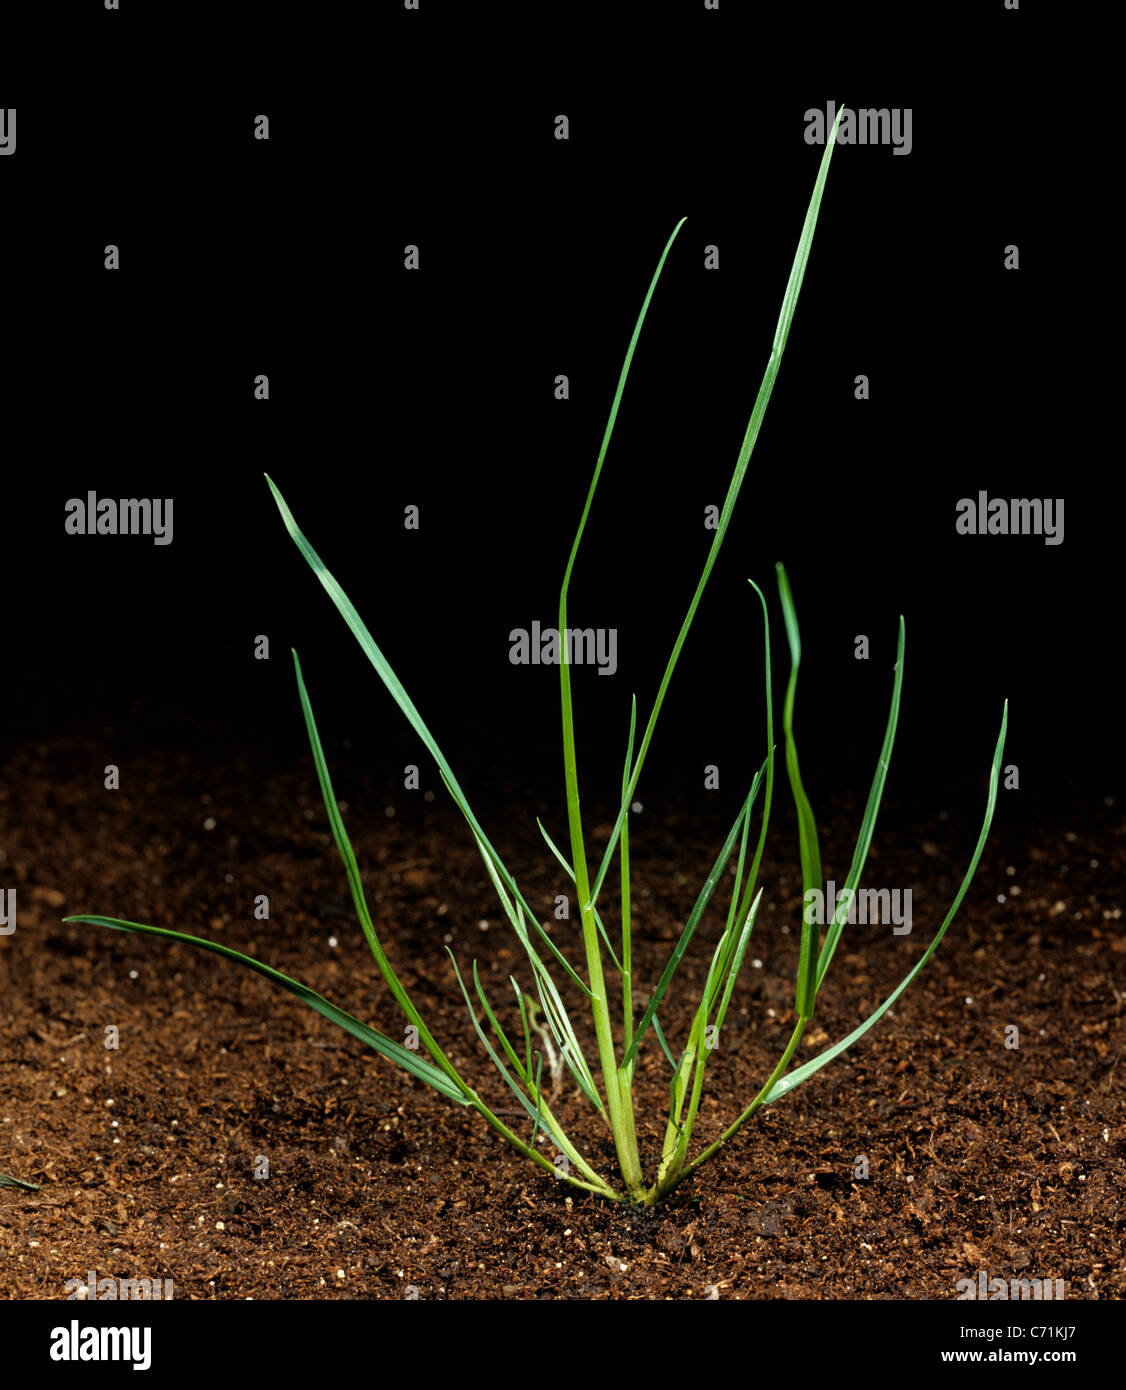 Silky bent (Apera spica-venti) young tillering plant Stock Photo